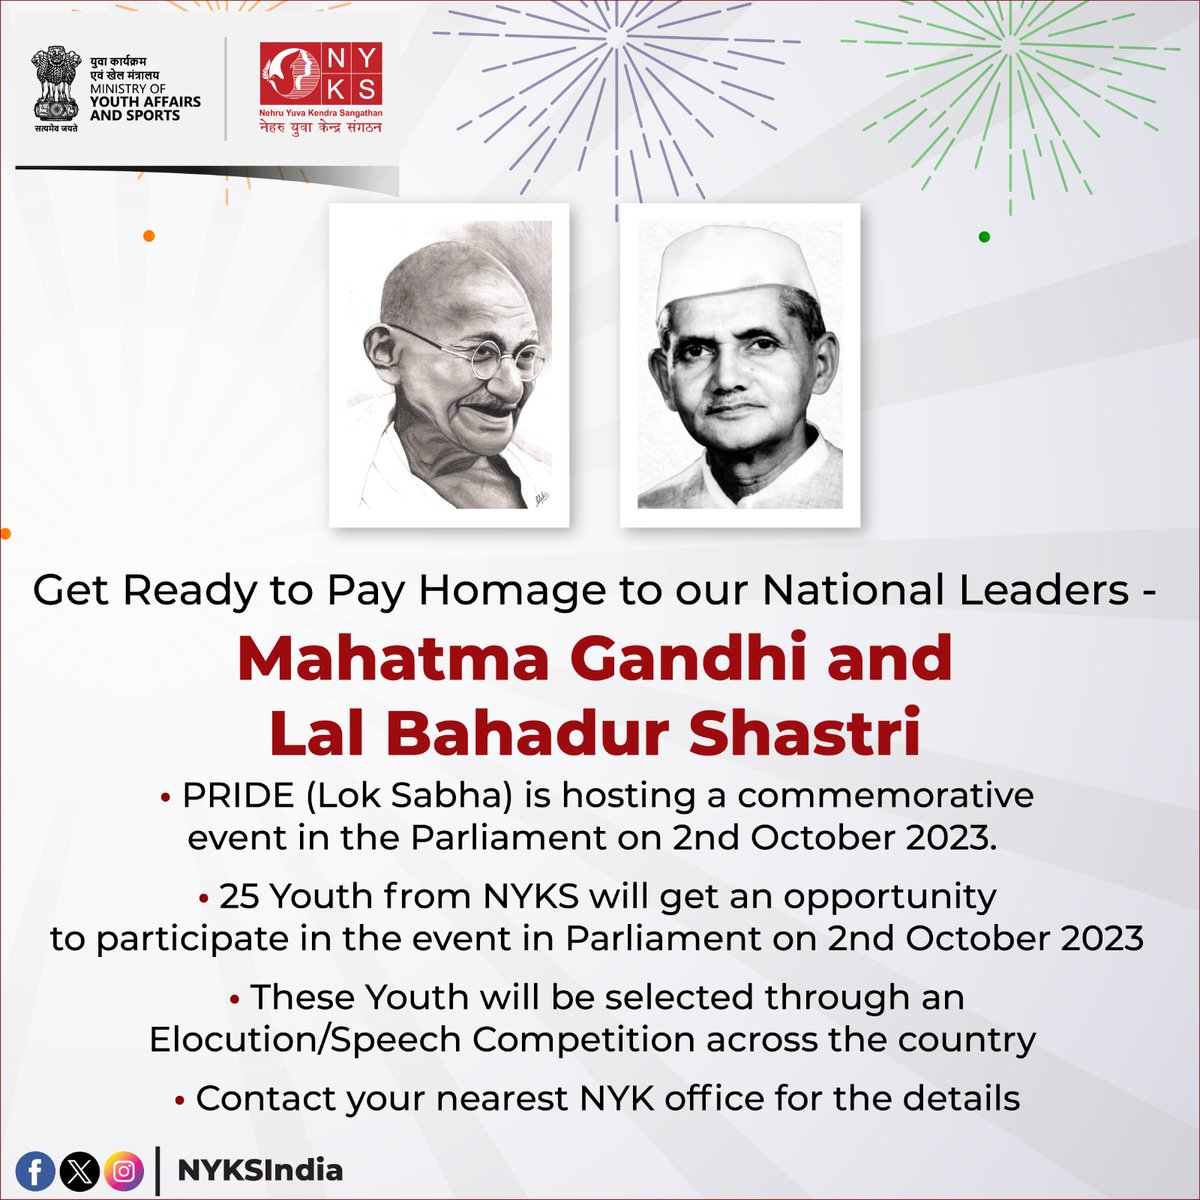 Your Voice, Their Legacy: Join us in Parliament on 2nd October 2023 to honor Mahatma Gandhi and Lal Bahadur Shastri. 🇮🇳🗣️ 25 Youth Voices will echo their spirit in a historic event. Will you be one of them? 🌟 
#YouthInParliament #RememberingLegends #NYKSIndia